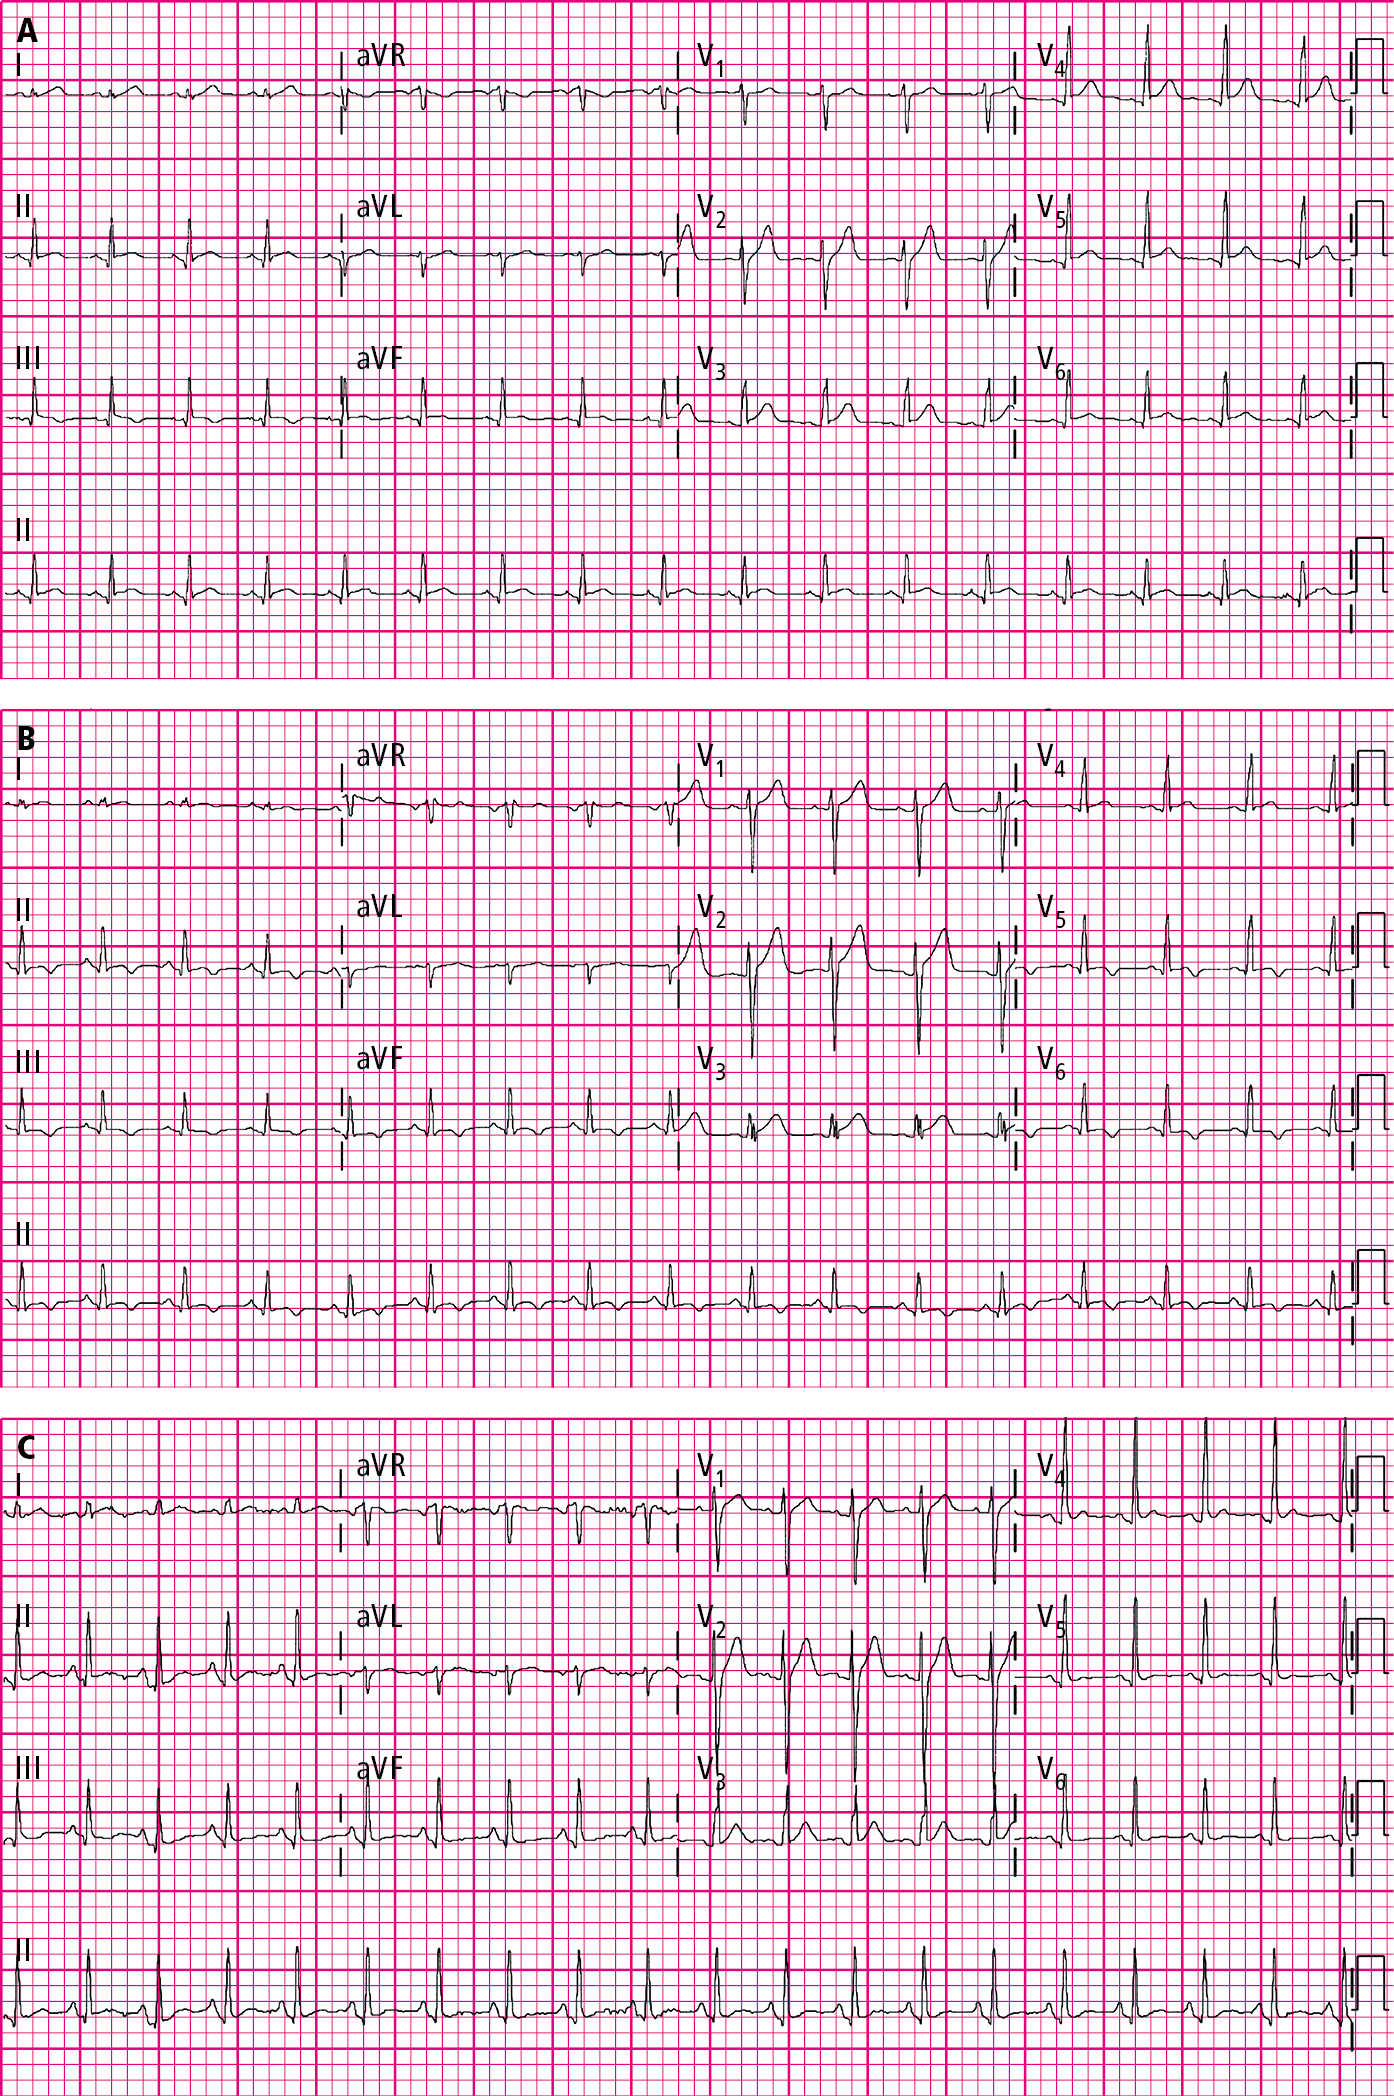 Figure 031_7505.  Classic electrocardiography (ECG) evolution in acute pericarditis. The initial ECG shows a diffuse ST-segment elevation and PR depression ( A ), which is followed by the resolution of the ST-segment elevation and then the presence of diffuse T-wave inversion ( B ), and lastly by improvement of all ECG changes ( C ).  Figures courtesy of Dr Hassan Mir.  